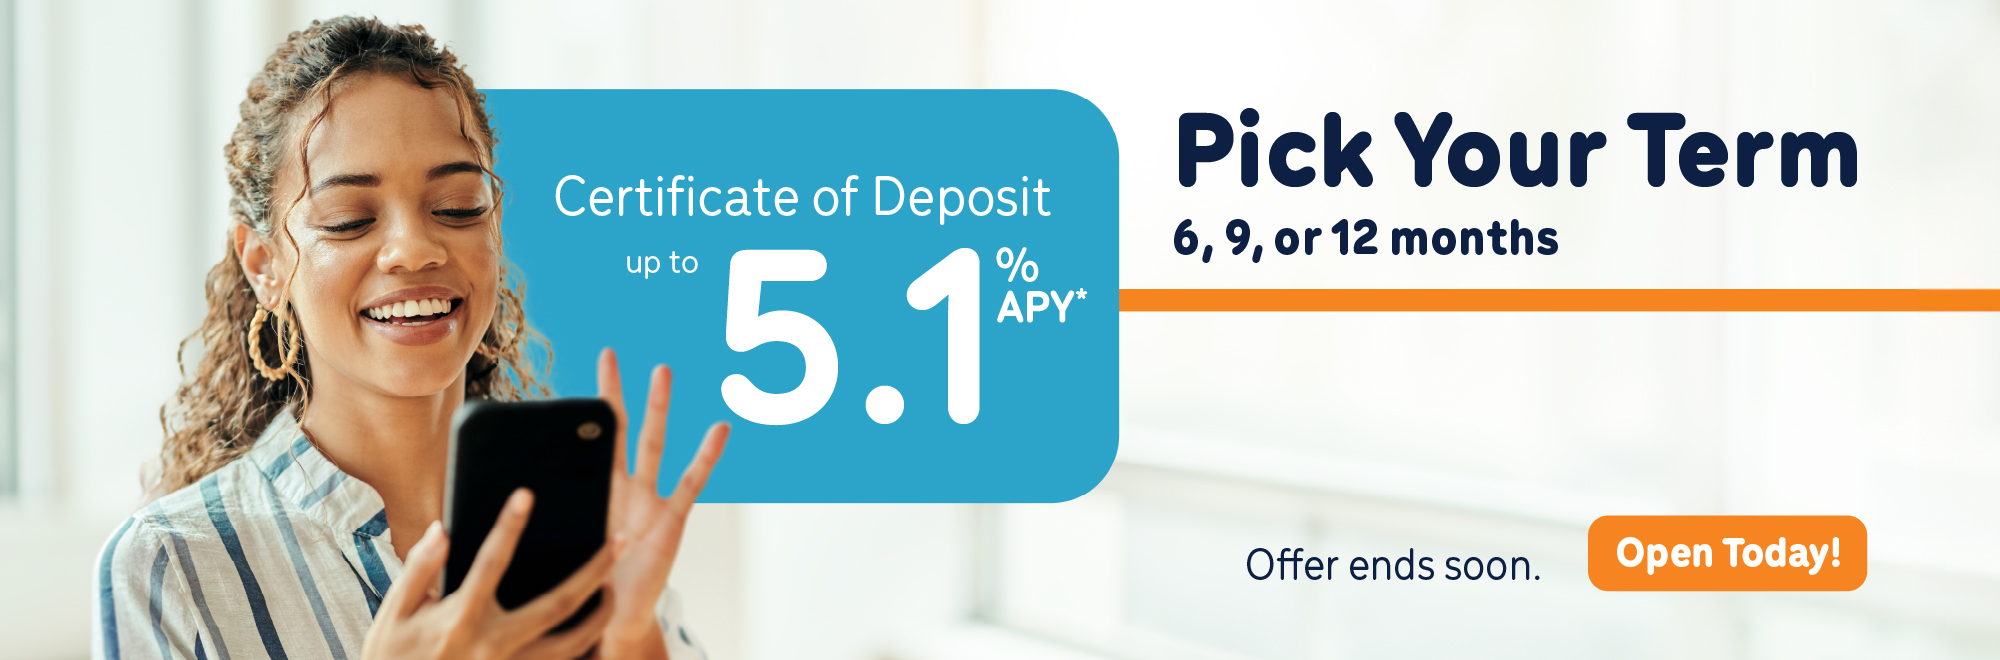 Pick your term 6, 9, 12 months certificate deposit up to 5.1% Annual Percentage Yield. Offer ends soon!